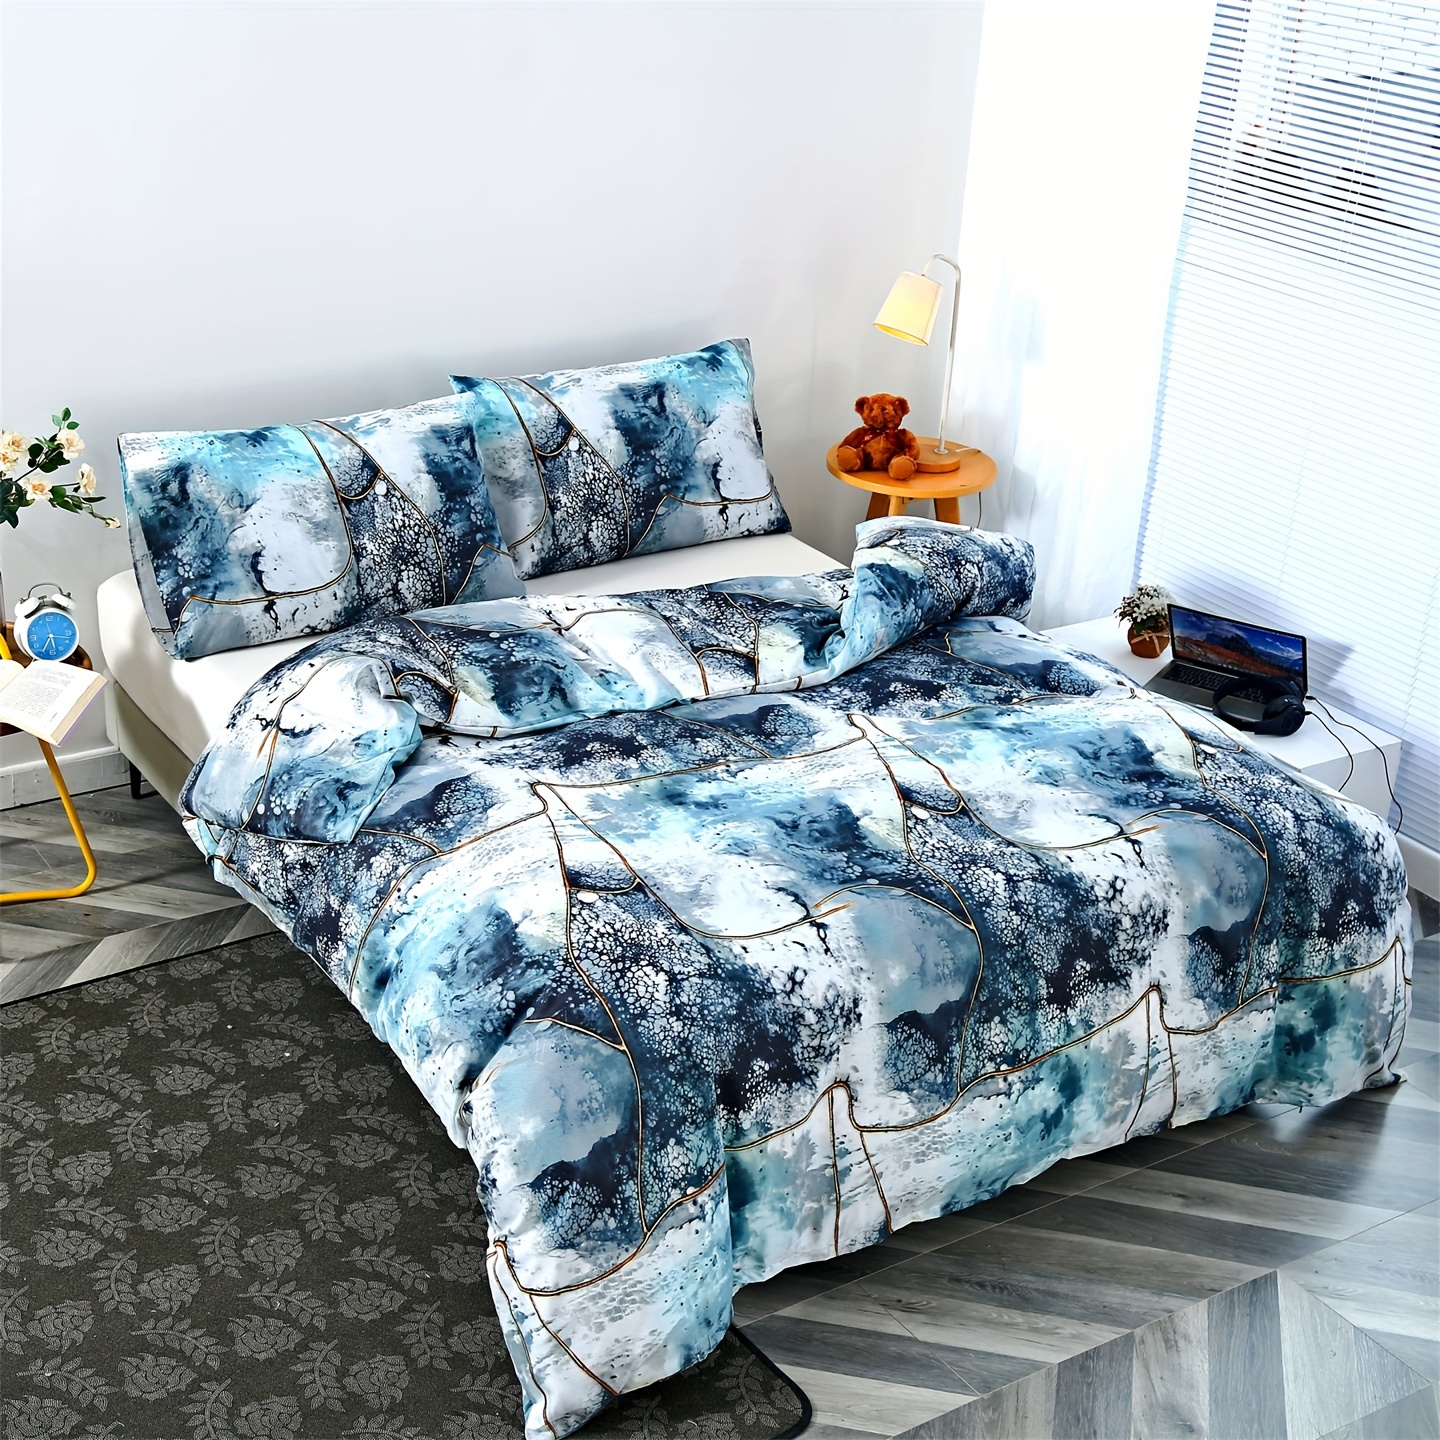 

3pcs Creative Graphic Print Bedding Quilt Cover Set, Soft And Comfortable, Suitable For Bedroom, Guest Room (one Quilt Cover + 2 Pillow Cases, No Core)